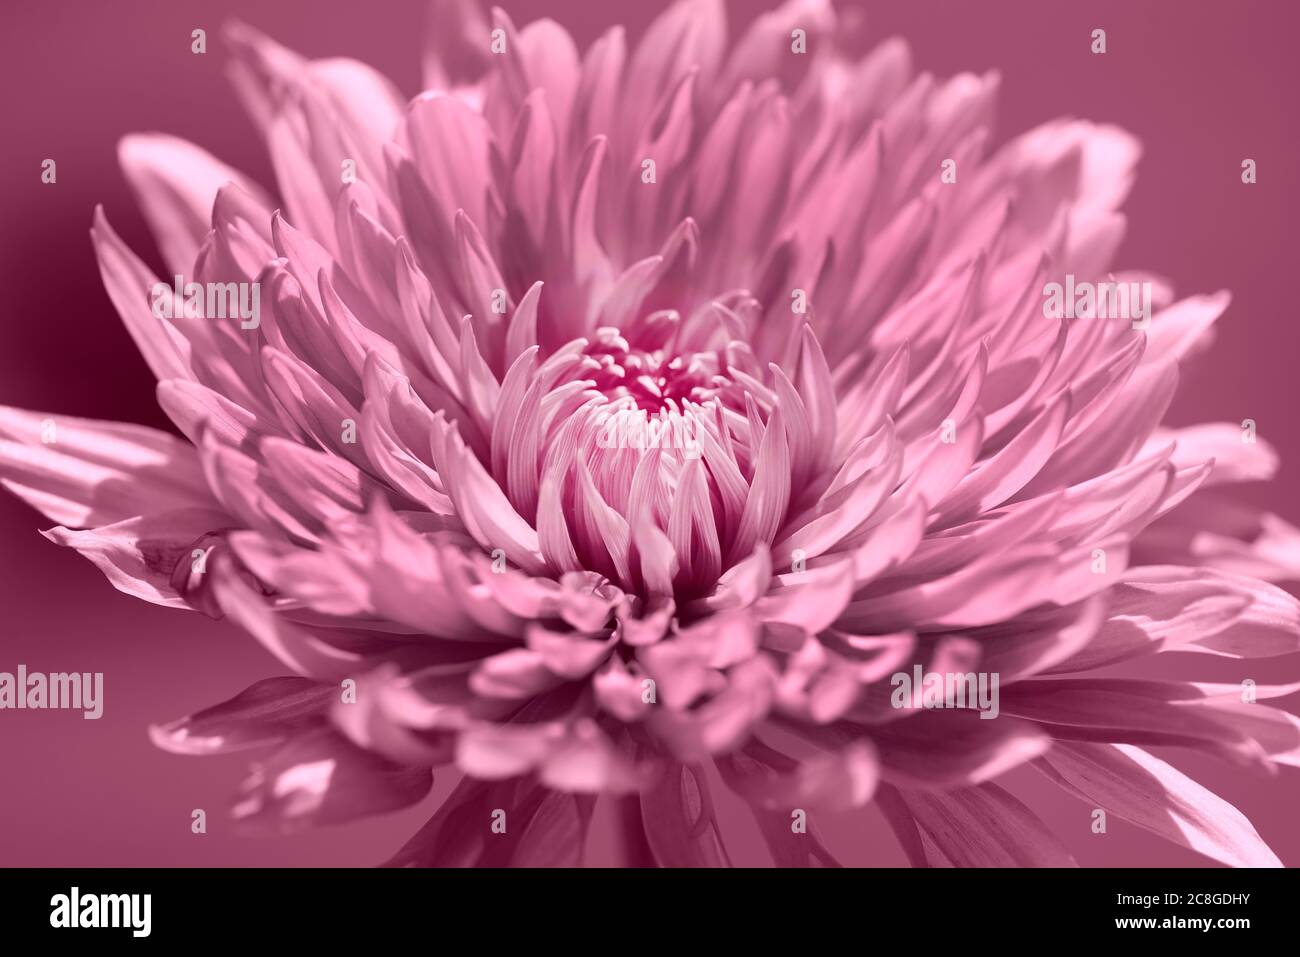 Blooming Pink Vibrant Chrysanthemum flower on a soft pink background Stock Photo